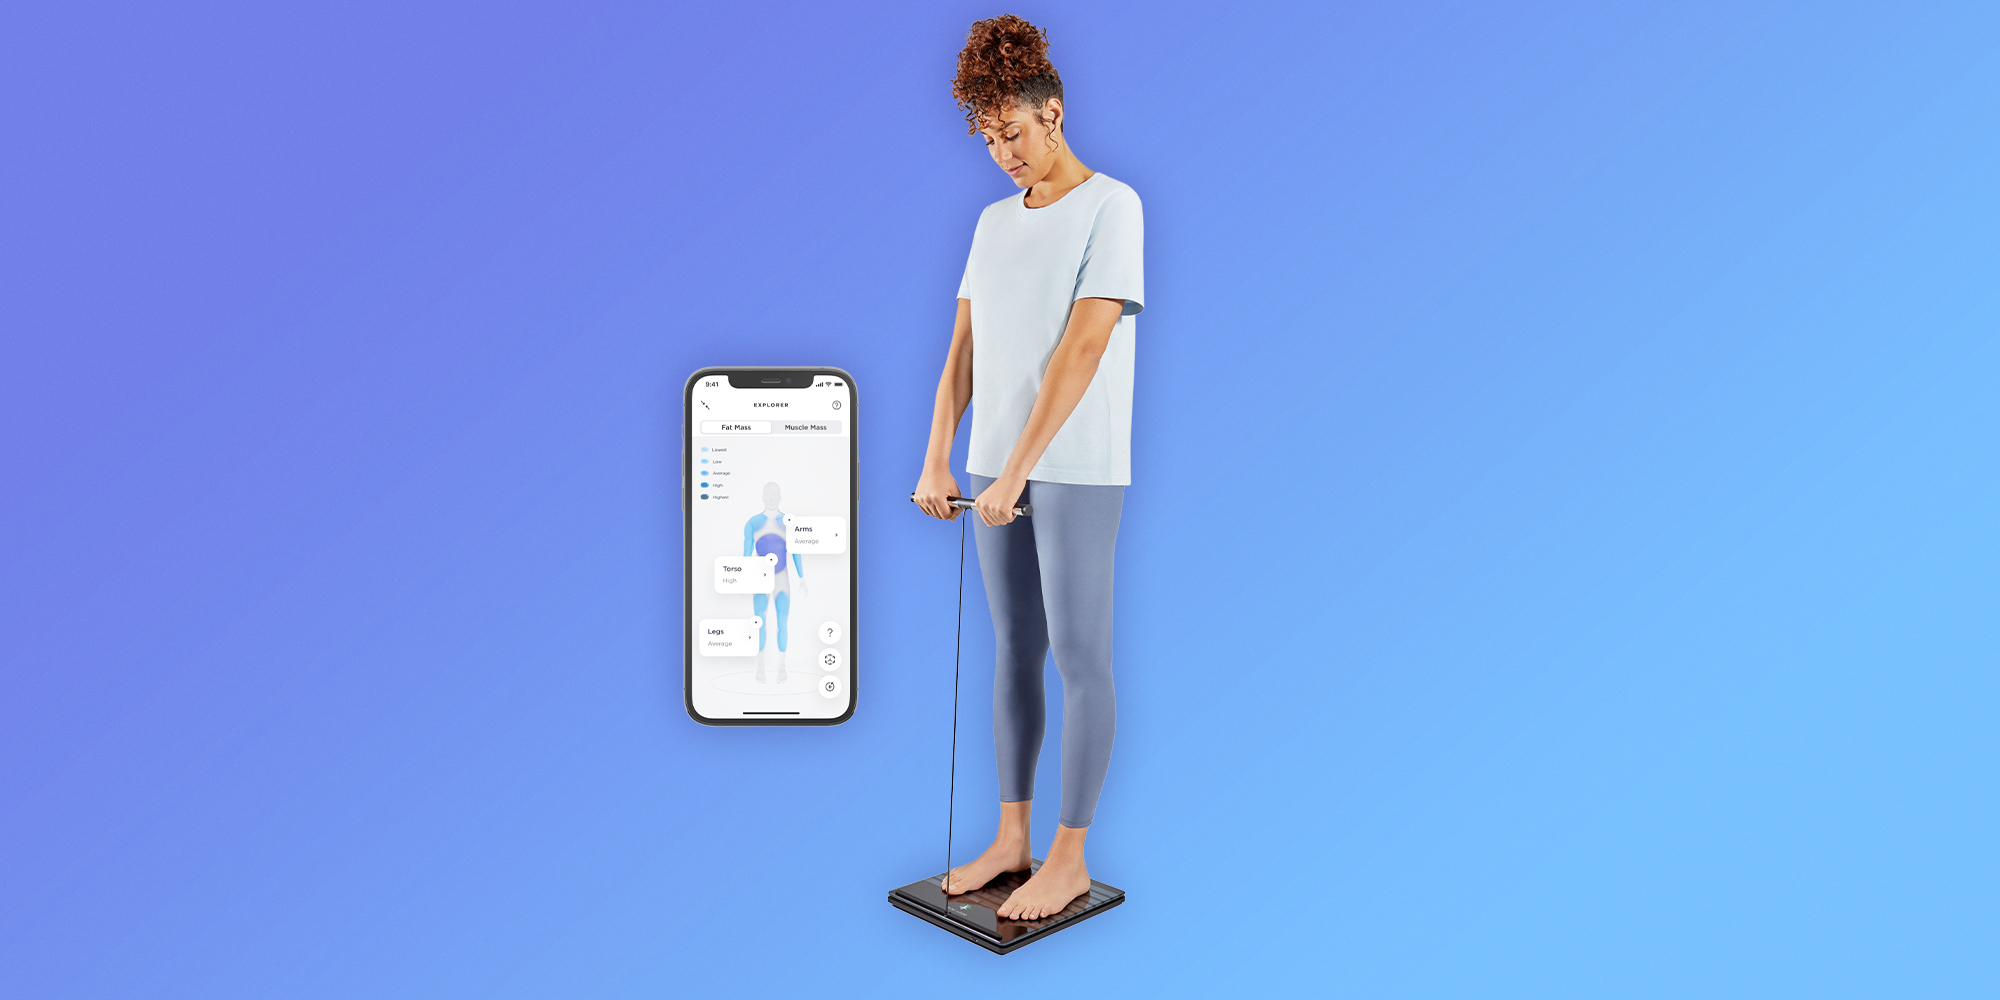 Body Scan - An error is displayed on the screen of my scale. What should I  do? – Withings